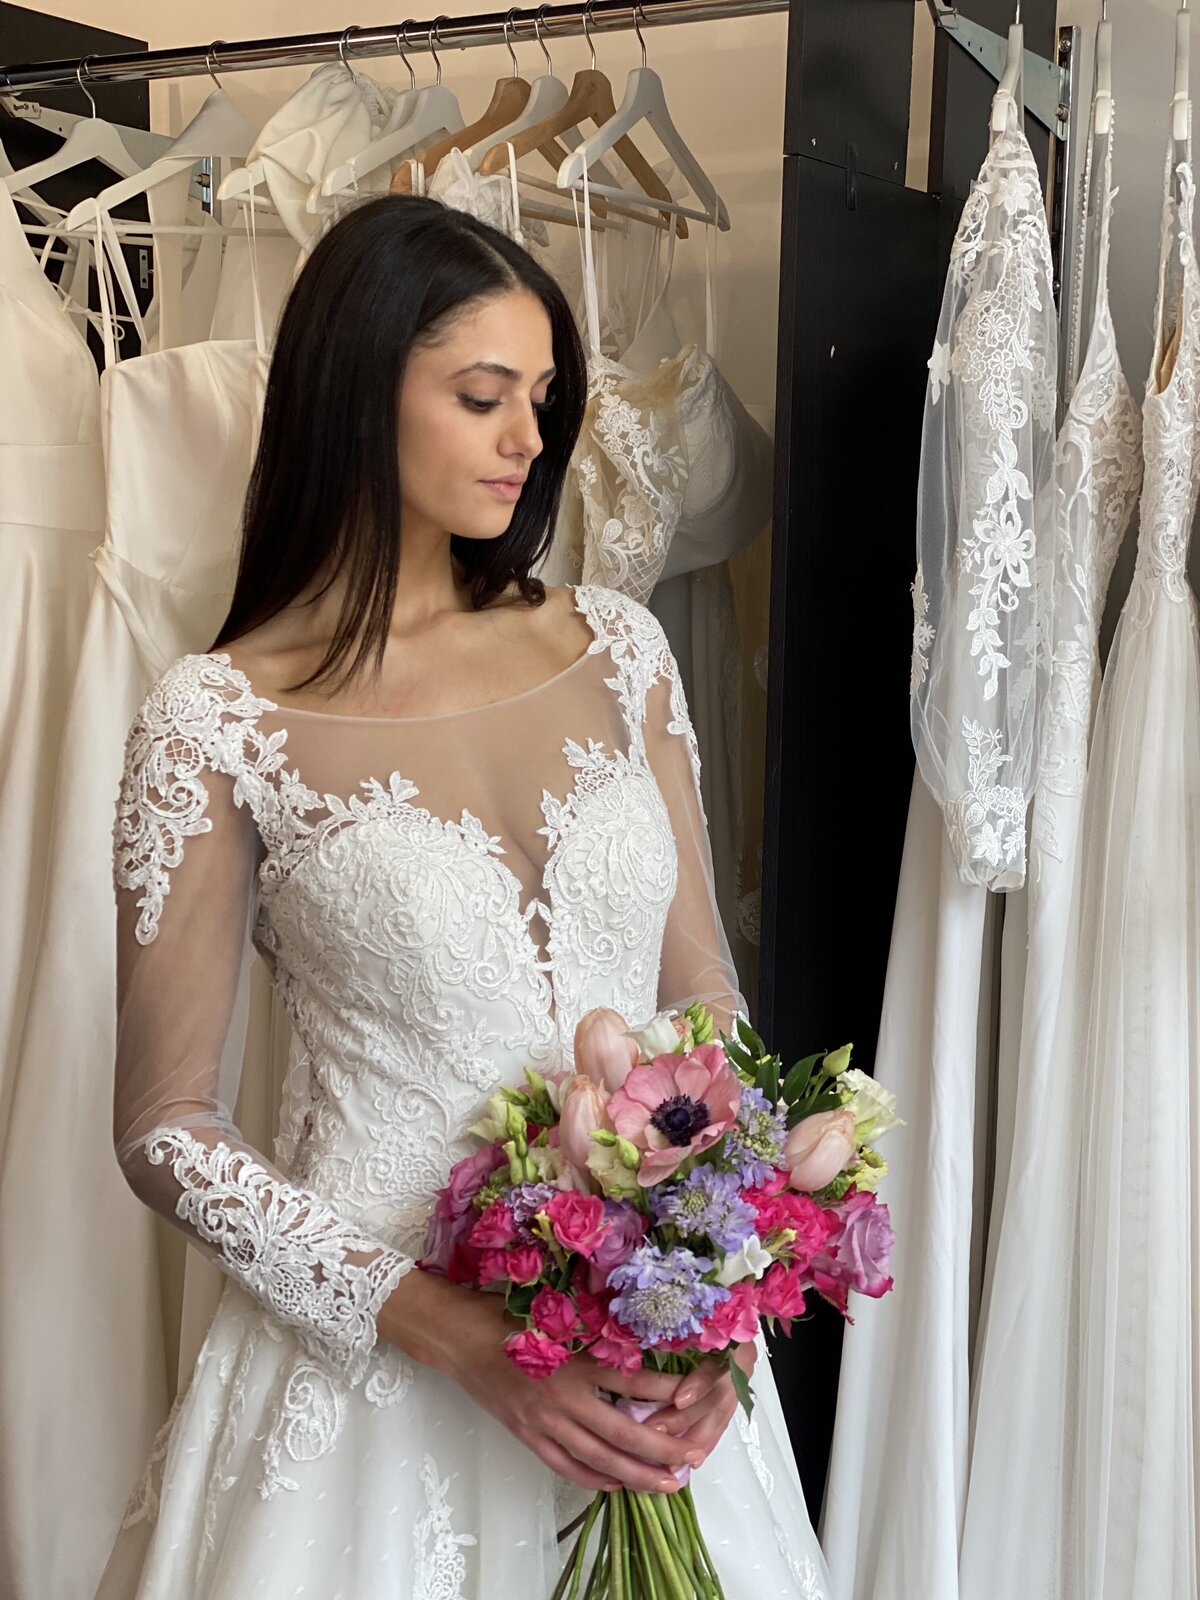 A bride in a beautiful bridal store holding a colorful bouquet in a modest and modern white a-line wedding gown with lace details.